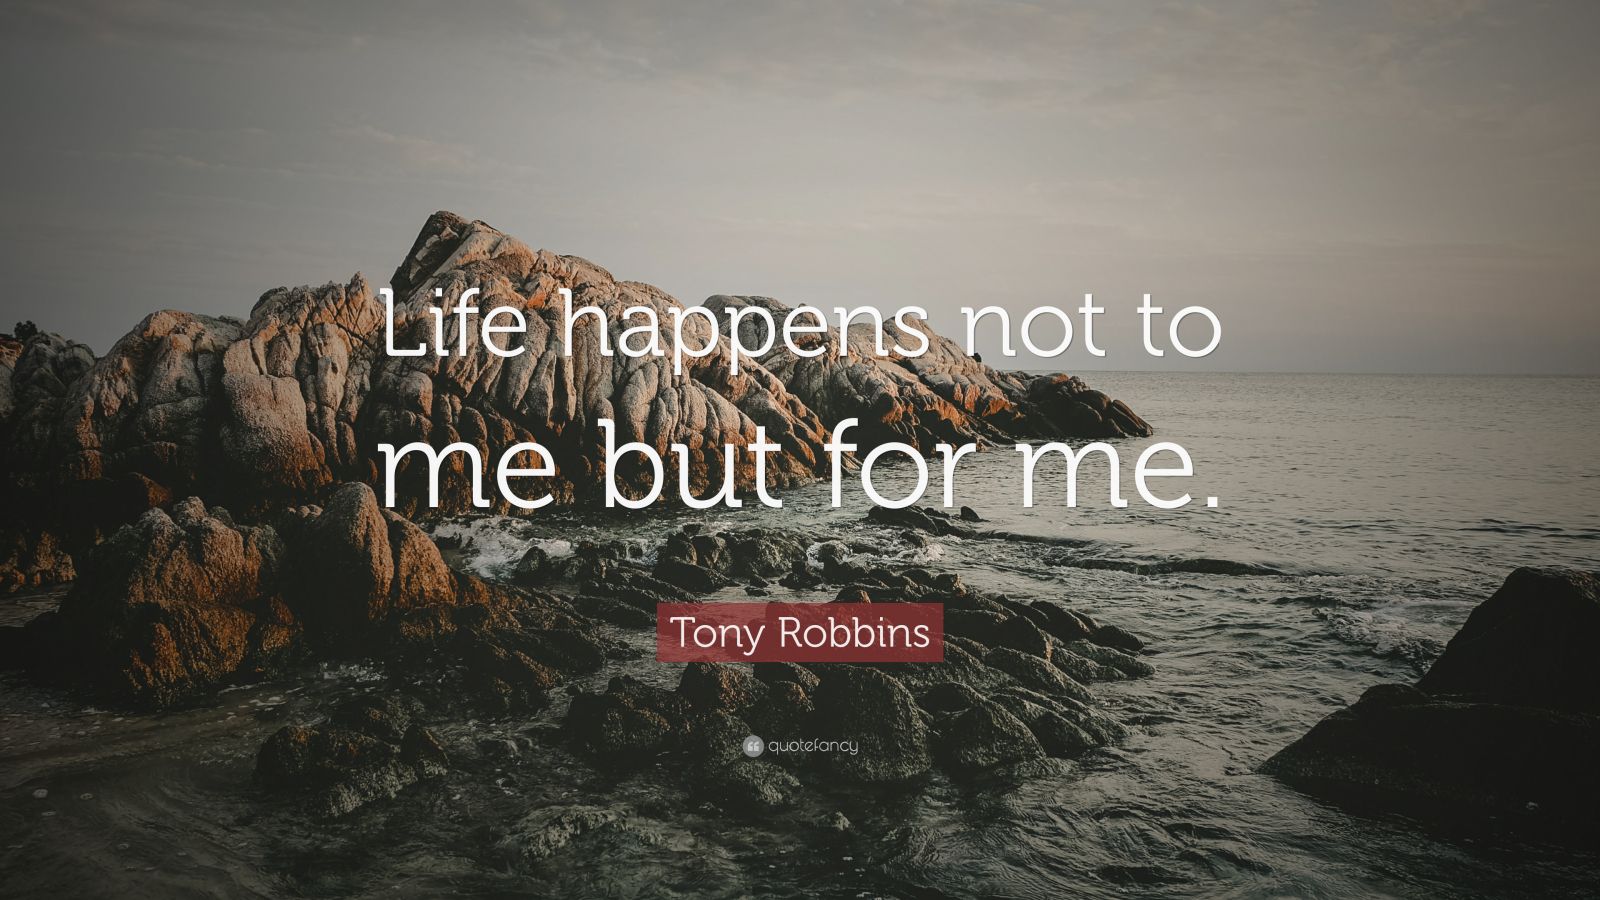 Tony Robbins Quote: “Life happens not to me but for me.” (12 wallpapers ...